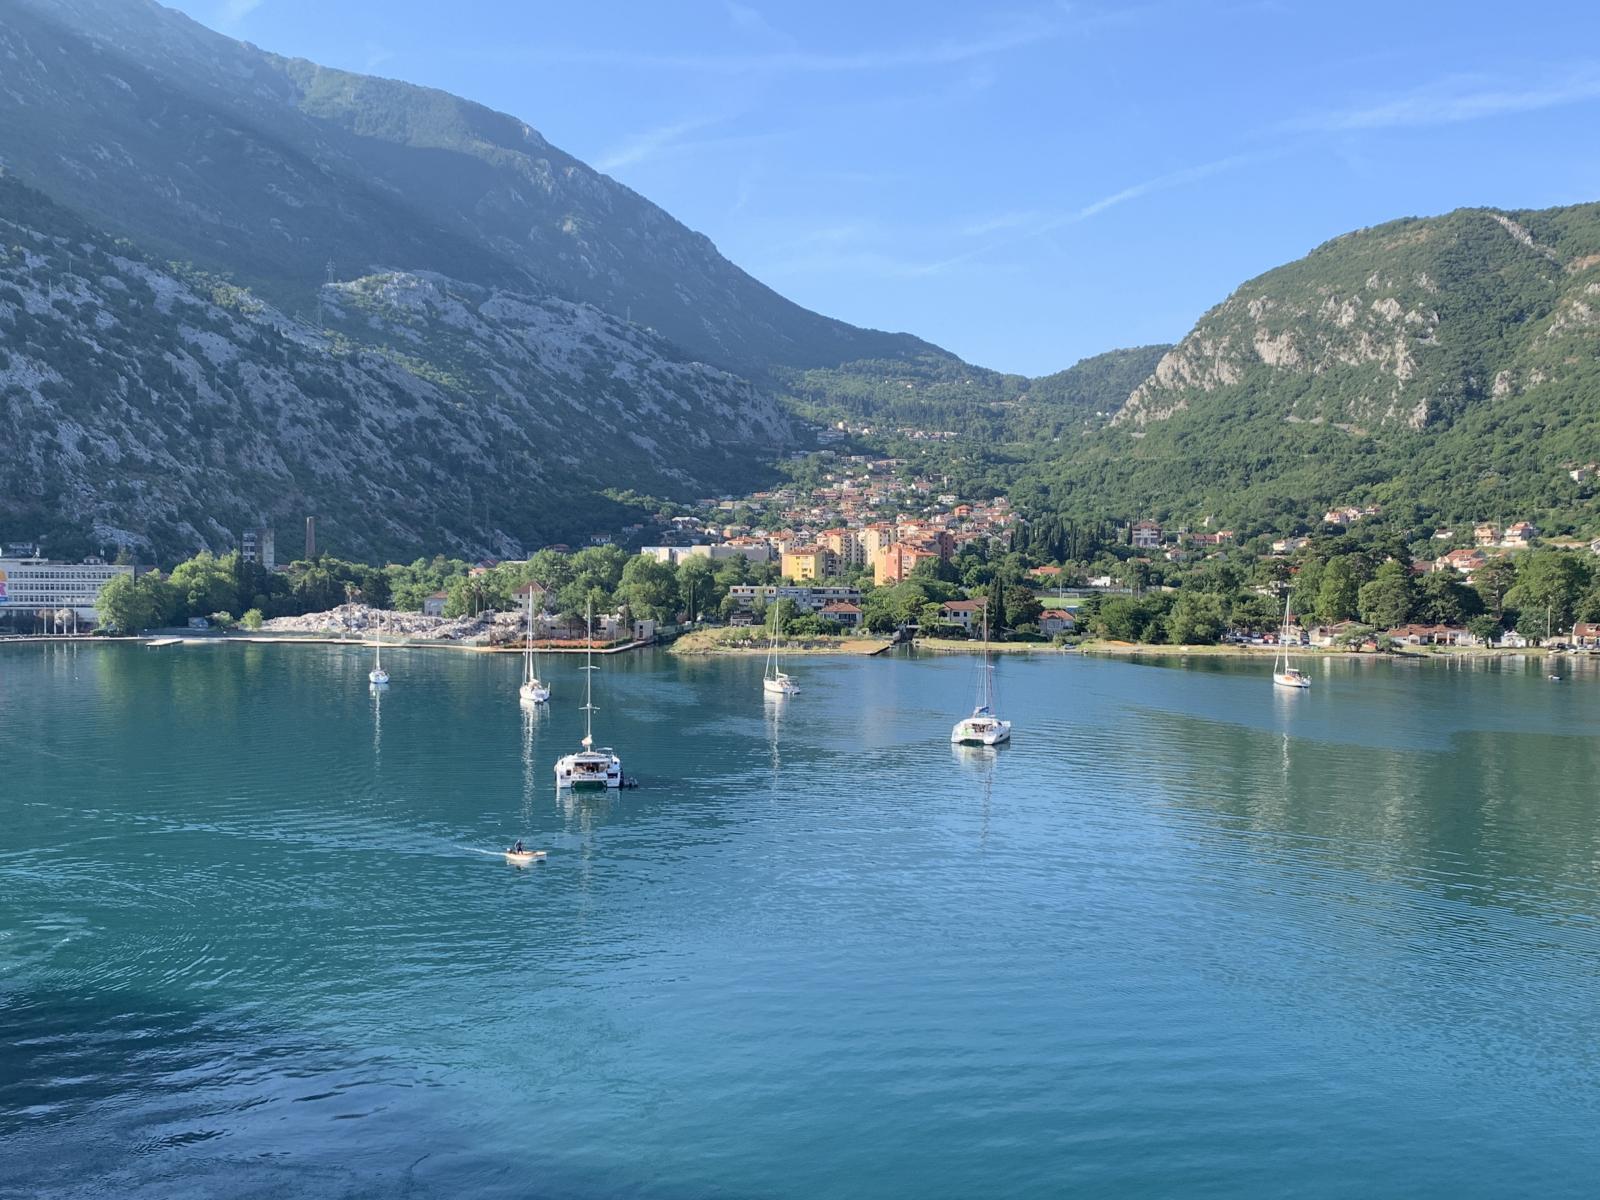 "Montenegro" 
Sooo Picturesque
(2019) : Photography : Susan Braha Photography and Fine Art